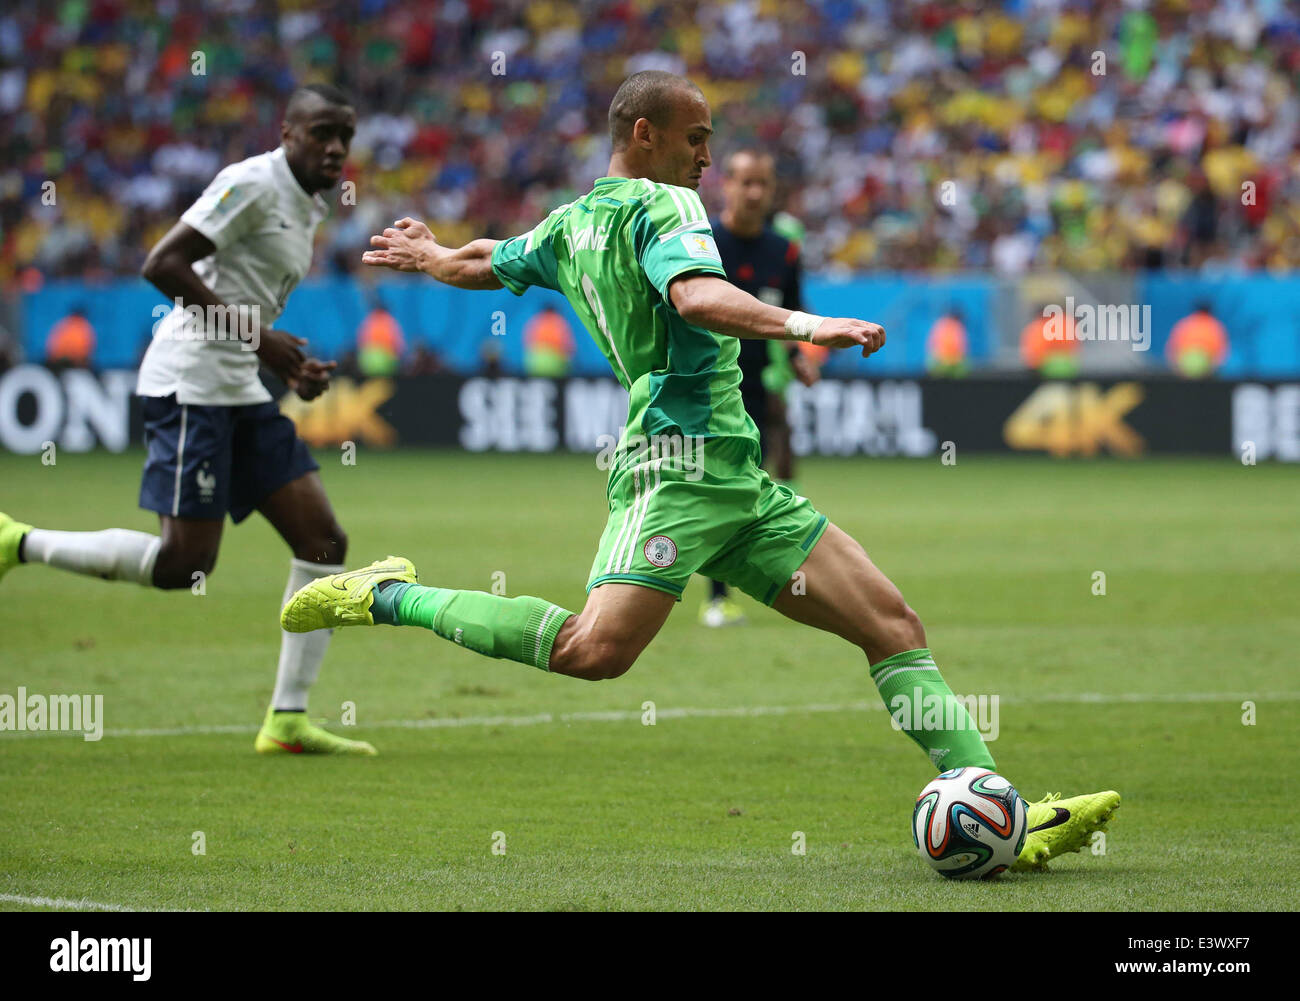 Brasilia, Brazil. 30th June, 2014. Nigeria's Peter Osaze Odemwingie (front) shoots during a Round of 16 match between France and Nigeria of 2014 FIFA World Cup at the Estadio Nacional Stadium in Brasilia, Brazil, on June 30, 2014. France won 2-0 over Nigeria and qualified for Quarter-finals here on Monday. Credit:  Li Ming/Xinhua/Alamy Live News Stock Photo